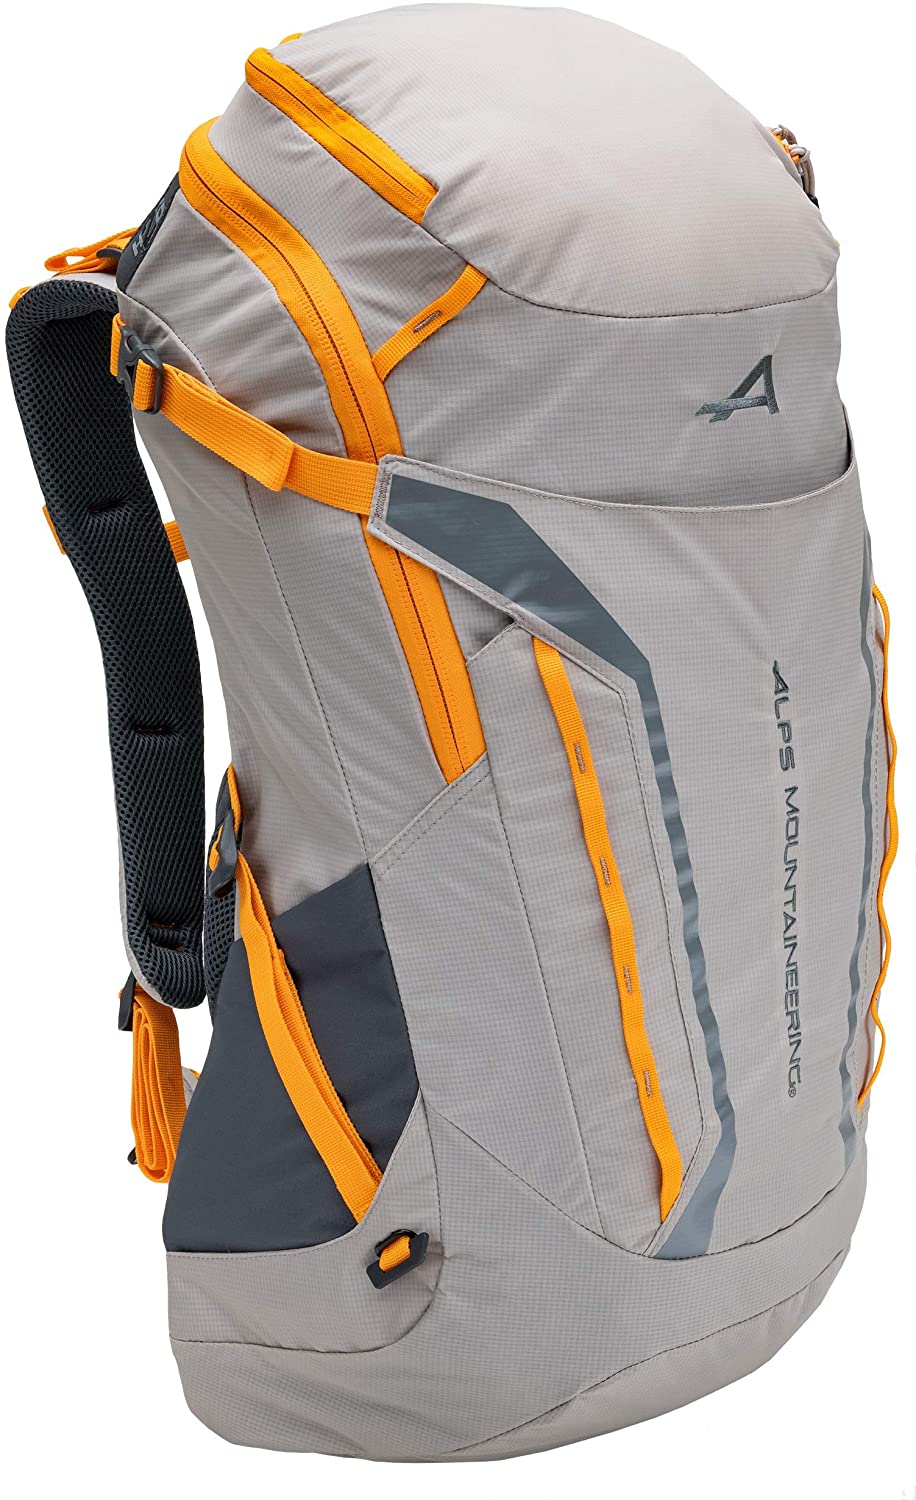 ALPS Mountaineering Baja Day Backpack 40L, Gray/Apricot - AL6542047